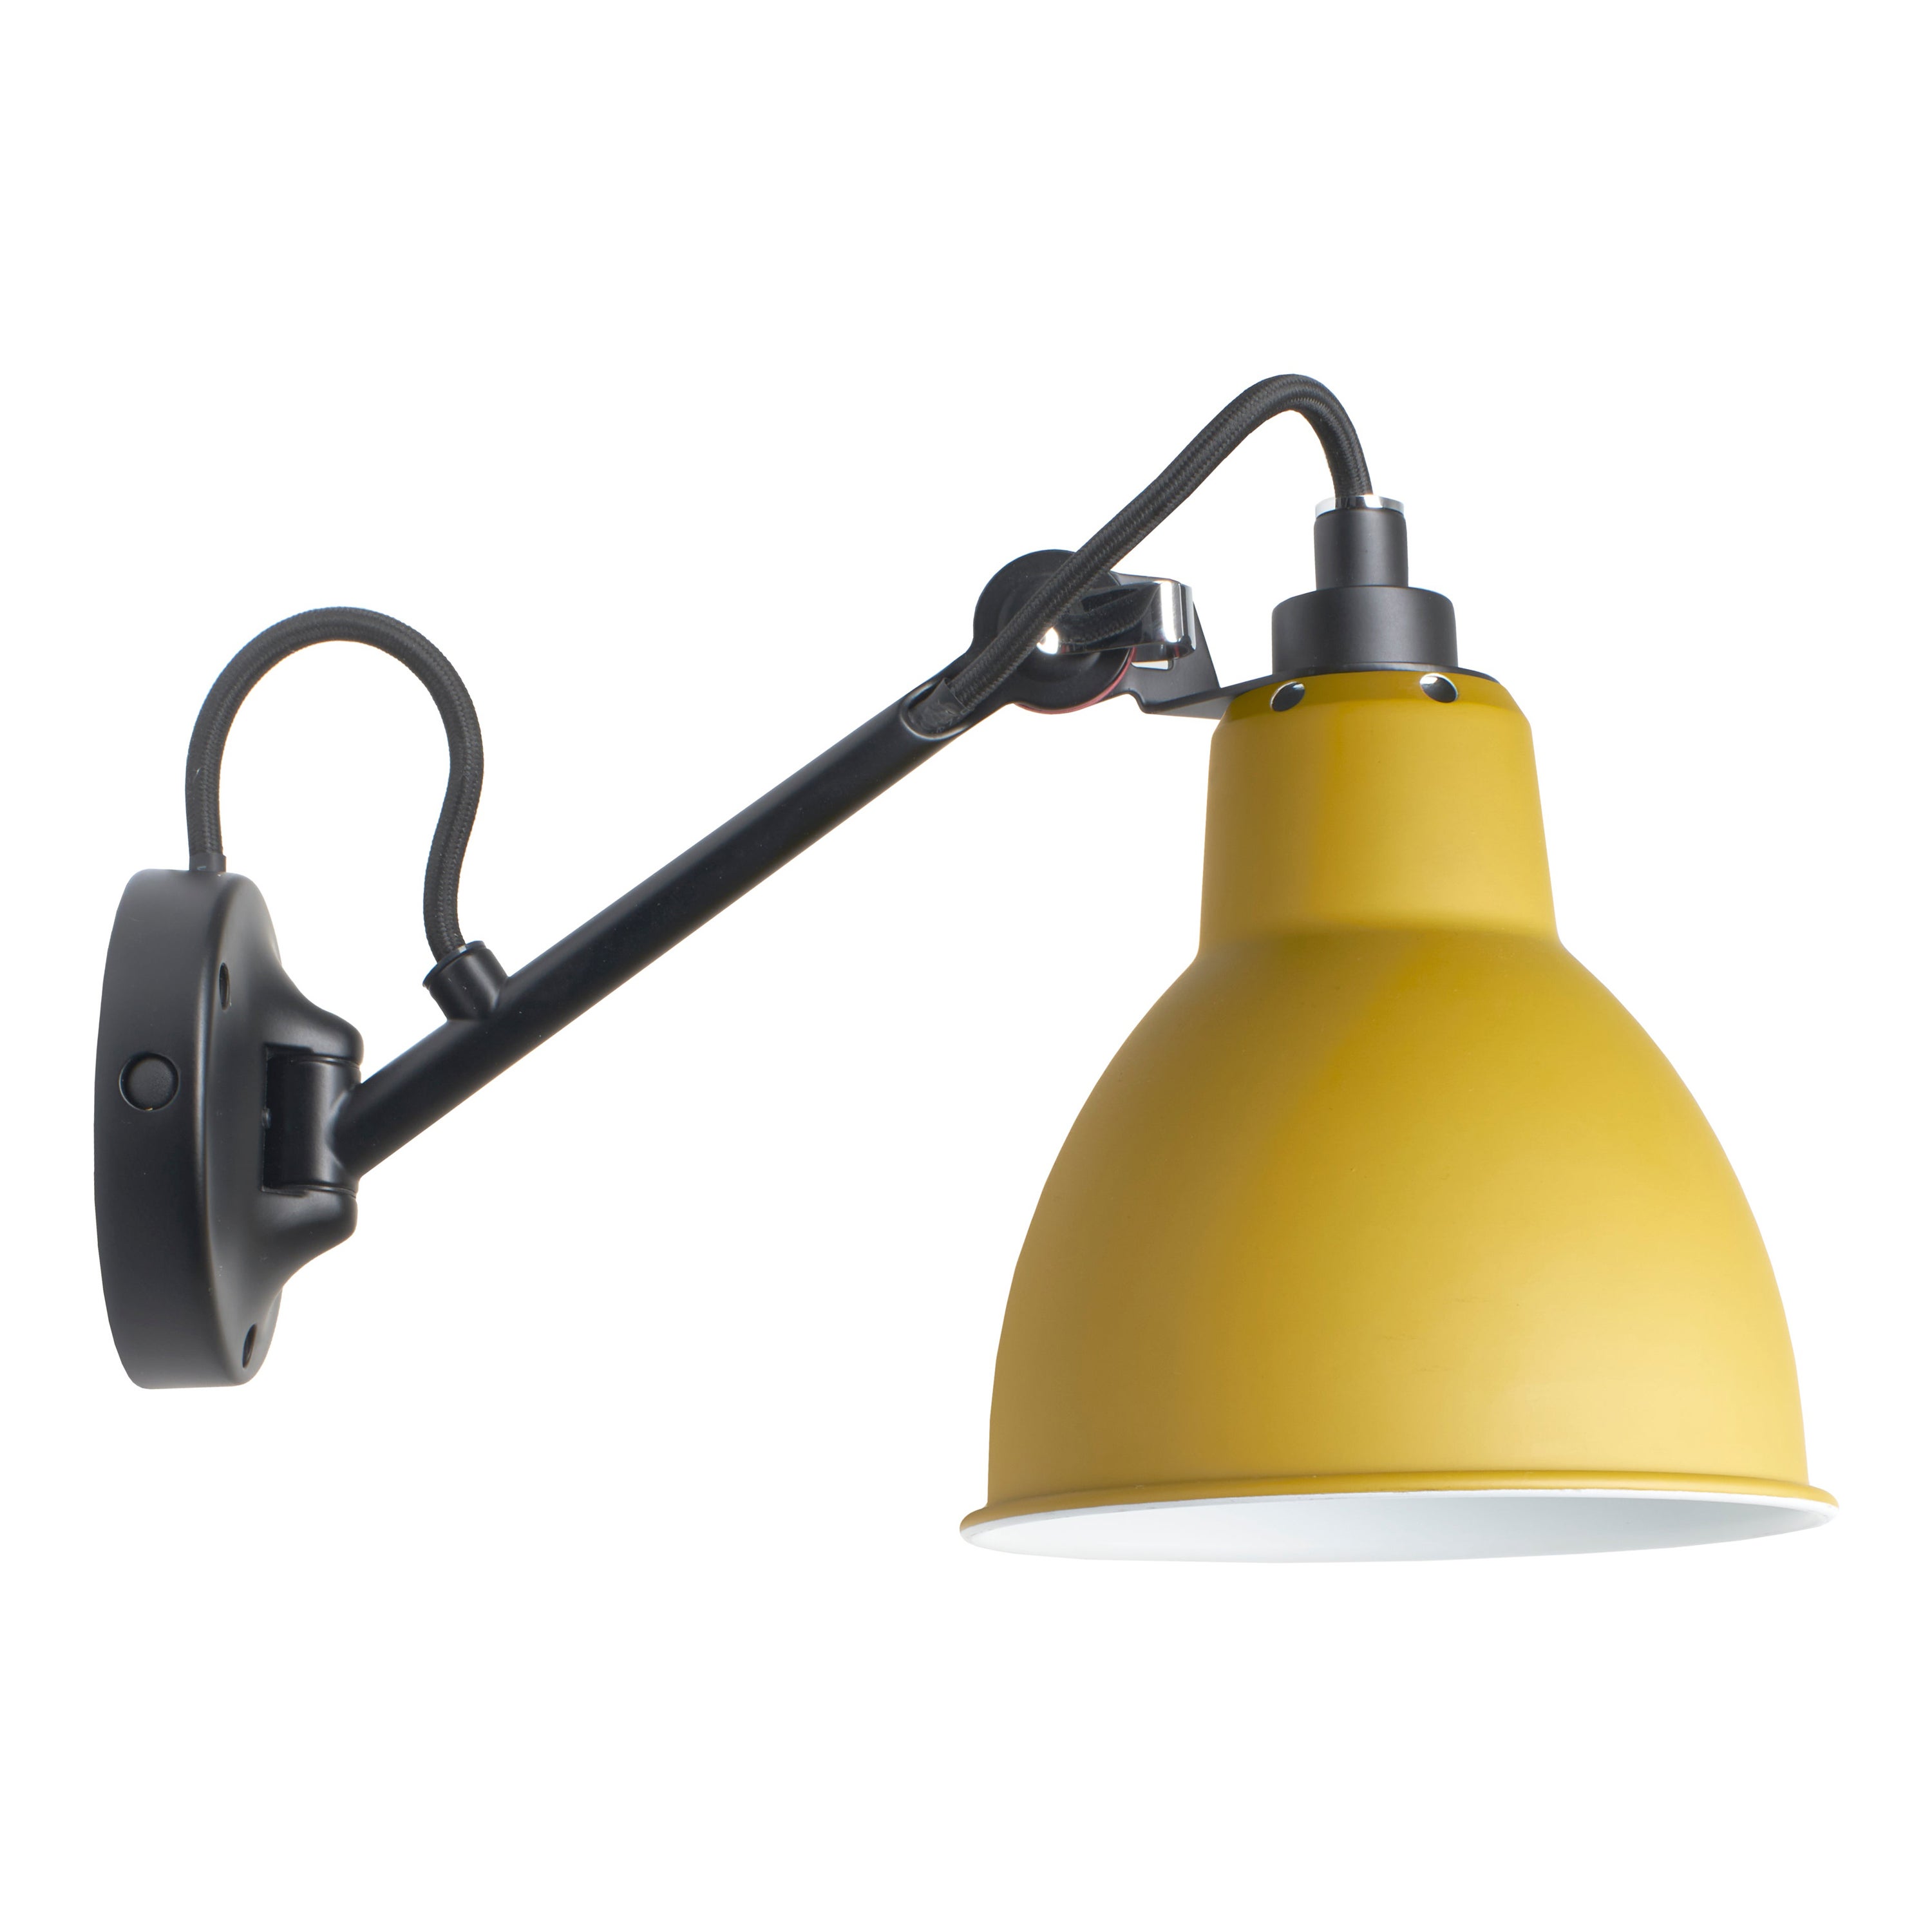 DCW Editions La Lampe Gras N°104 Wall Lamp in Black Arm and Yellow Shade